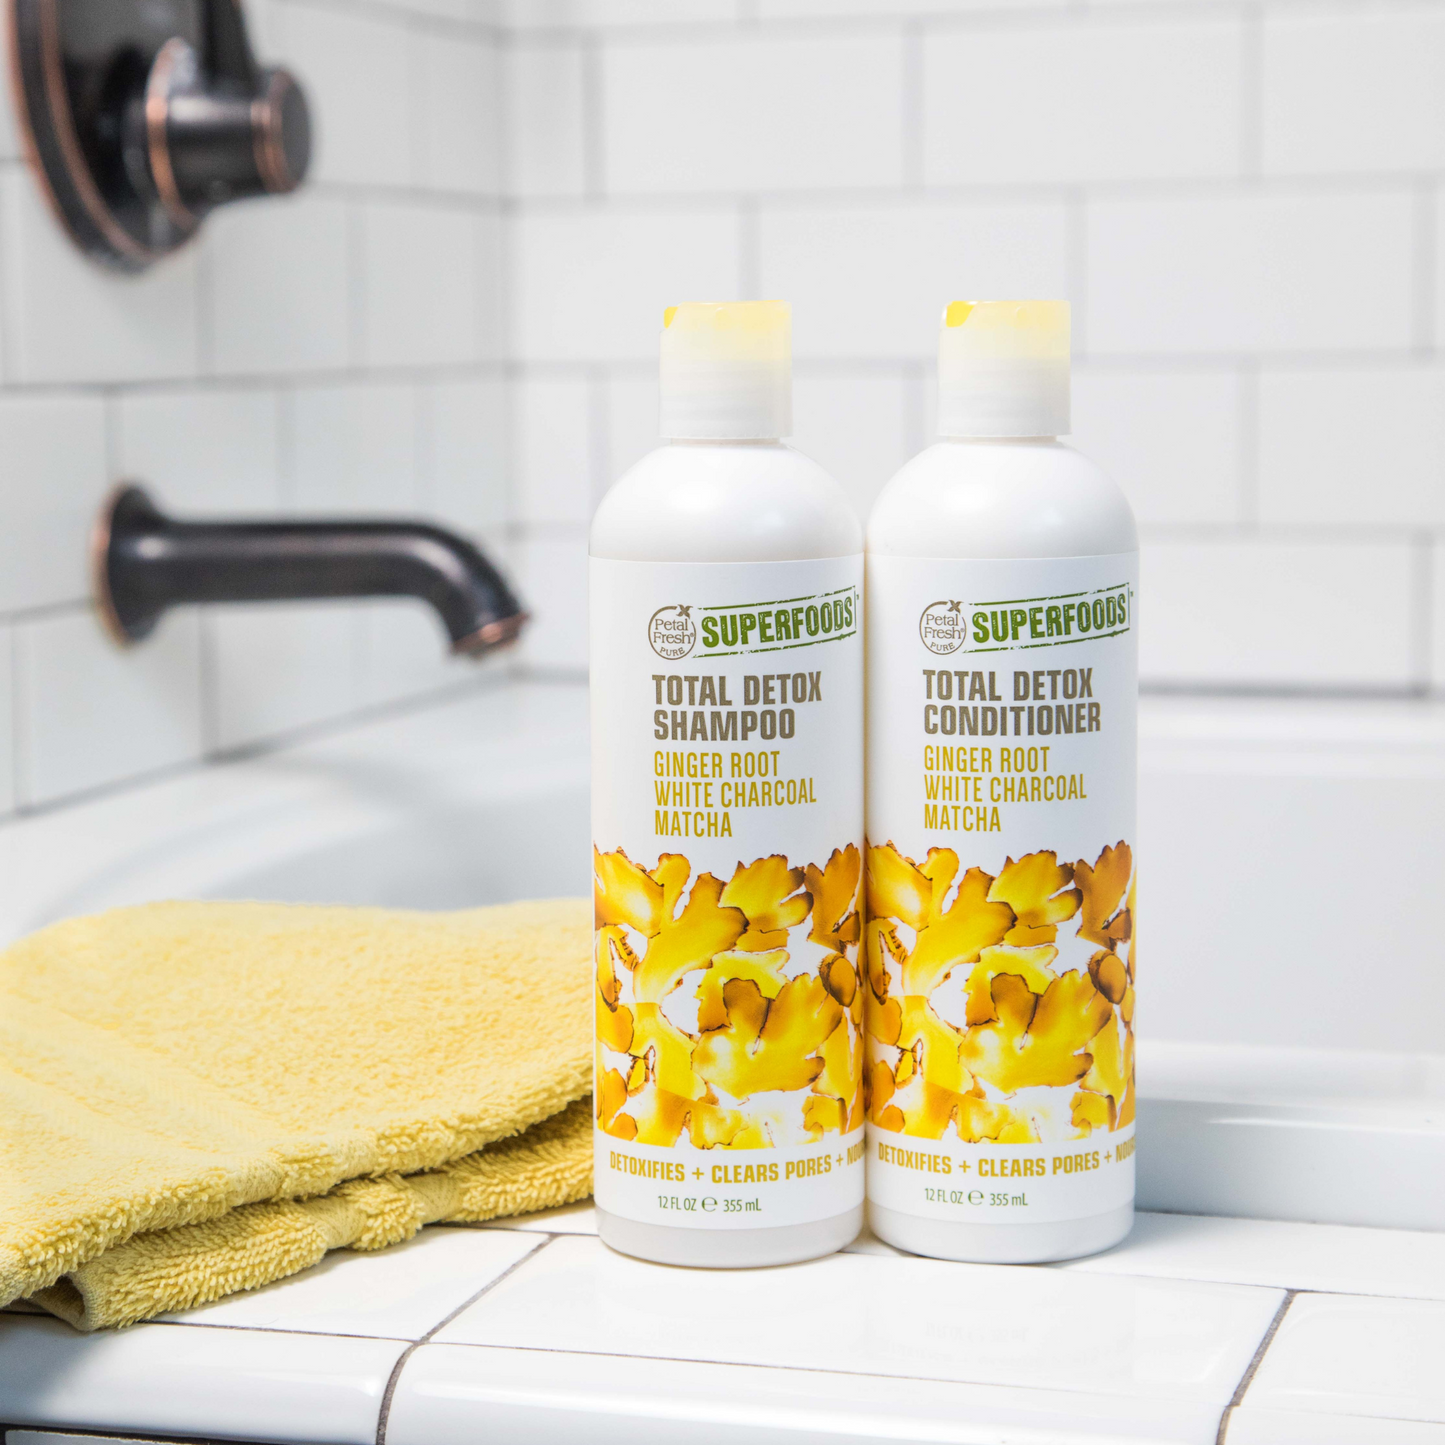 Superfoods Total Detox Shampoo & Conditioner